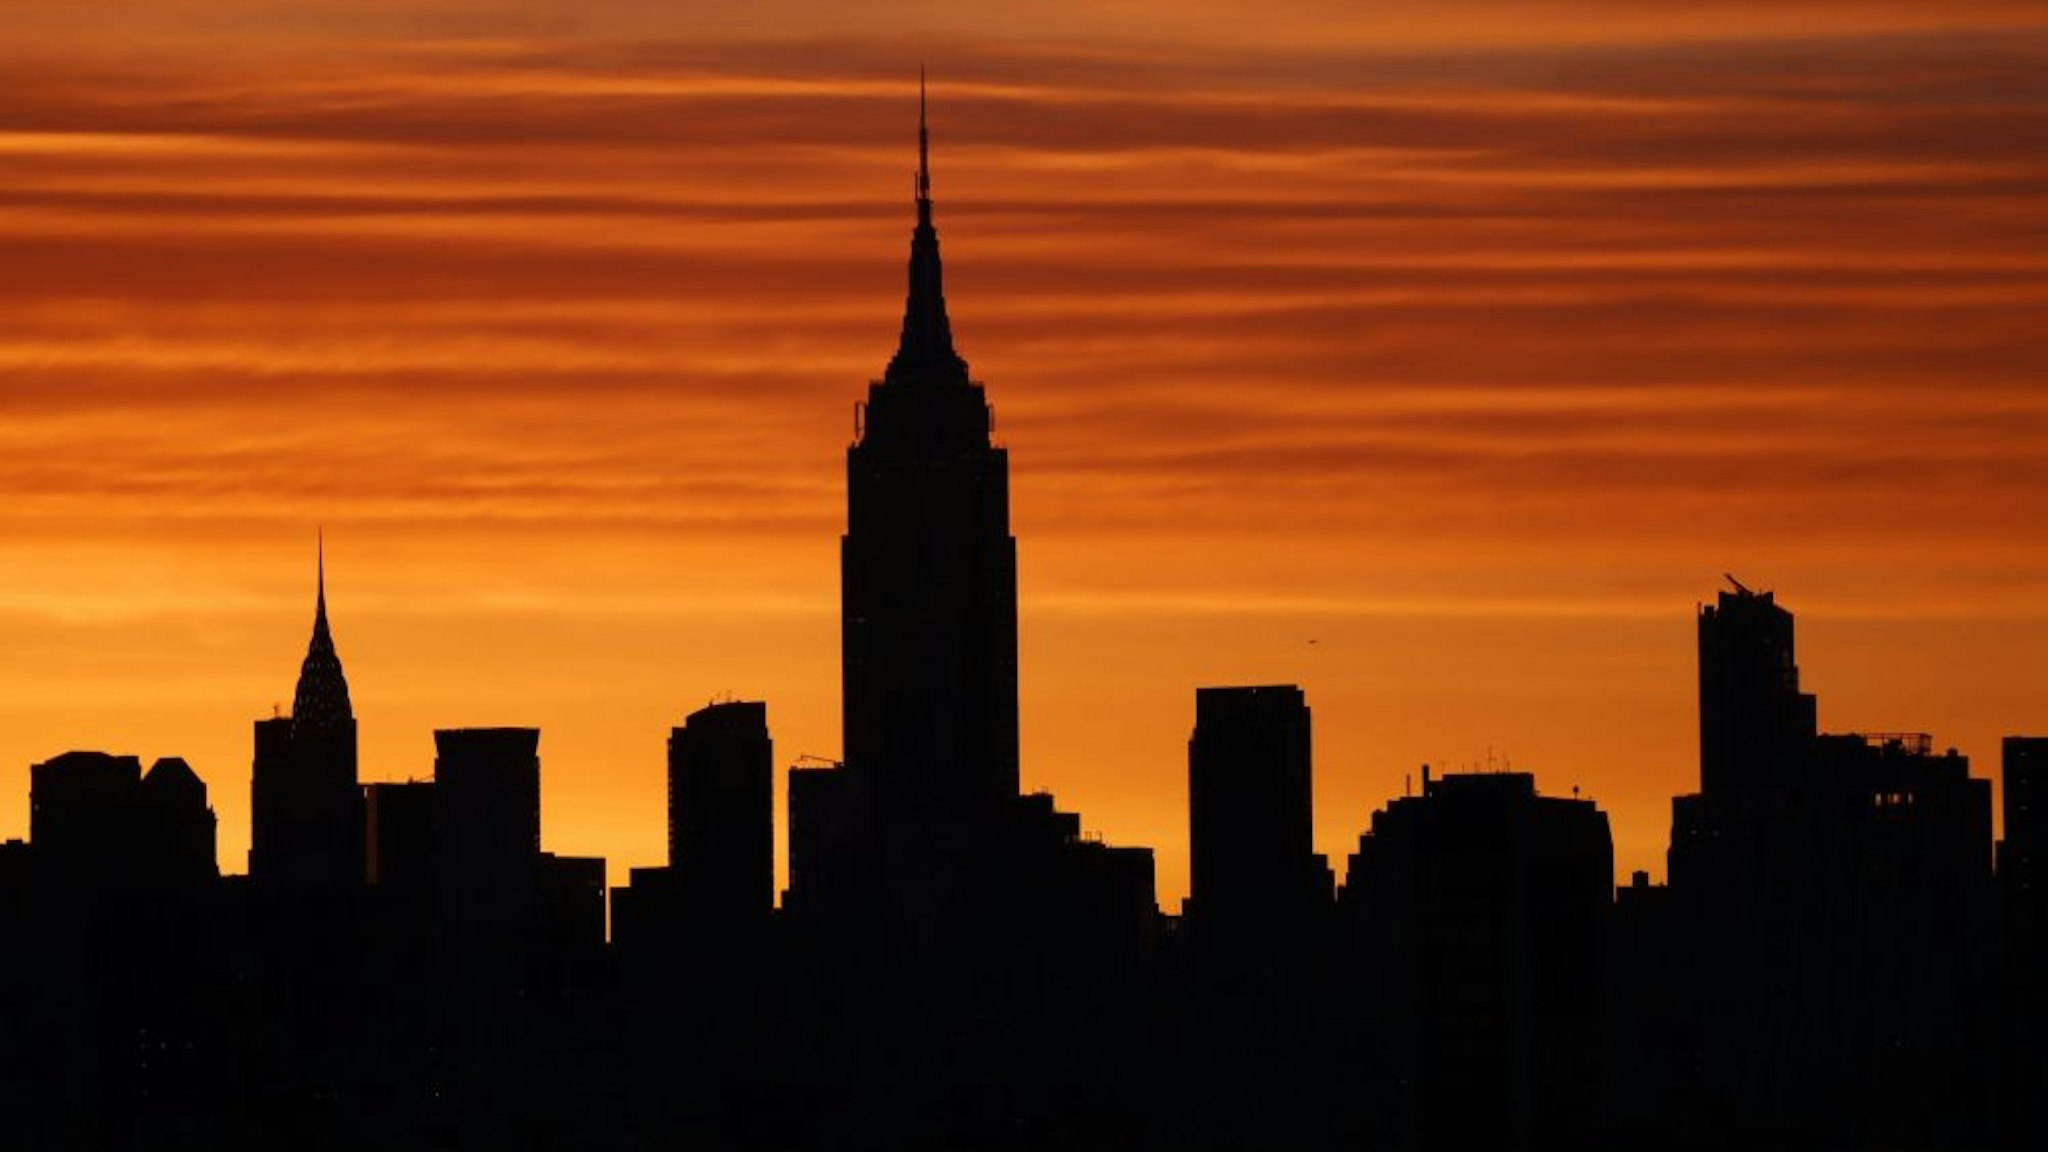 JERSEY CITY, NJ - APRIL 7: The sun rises behind the Empire State Building and Chrysler Building in New York City on April 7, 2021 as seen from Jersey City, New Jersey.